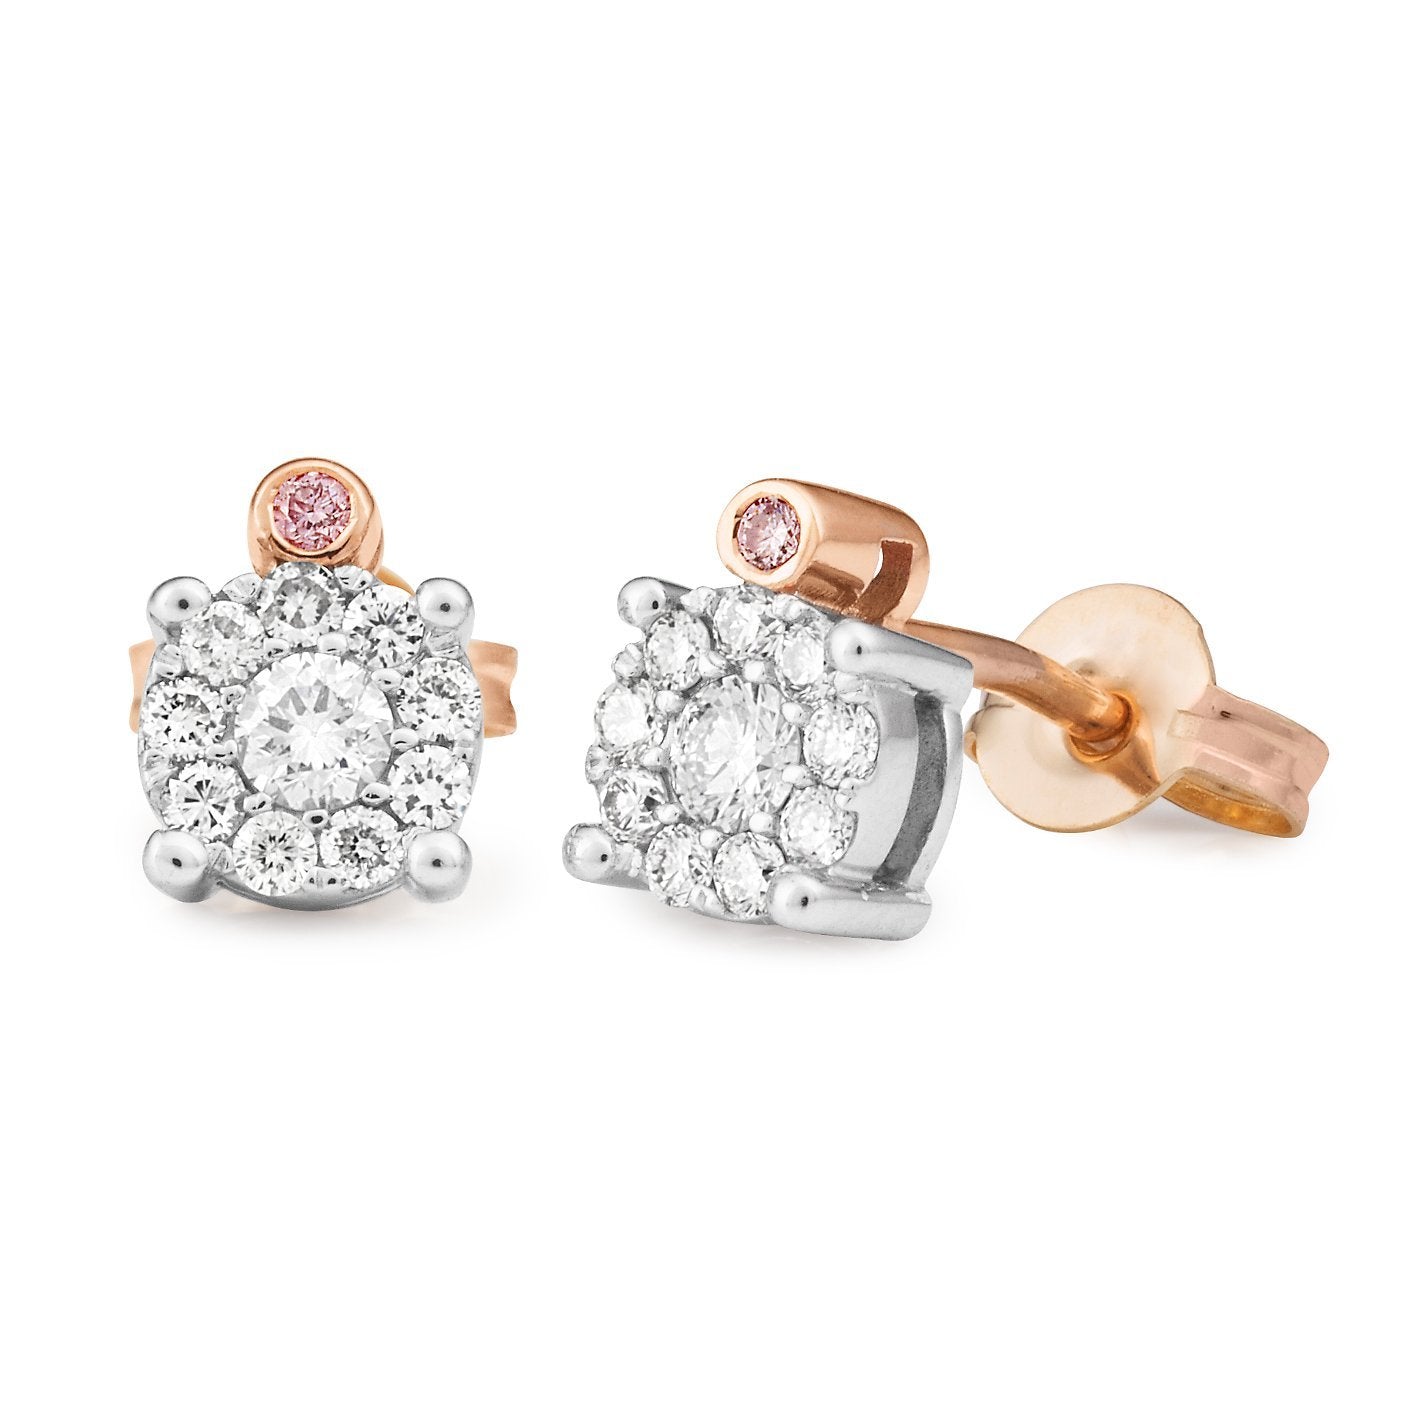 9ct Rose and White gold 0.26ct Diamond and Pink Diamond stud earrings